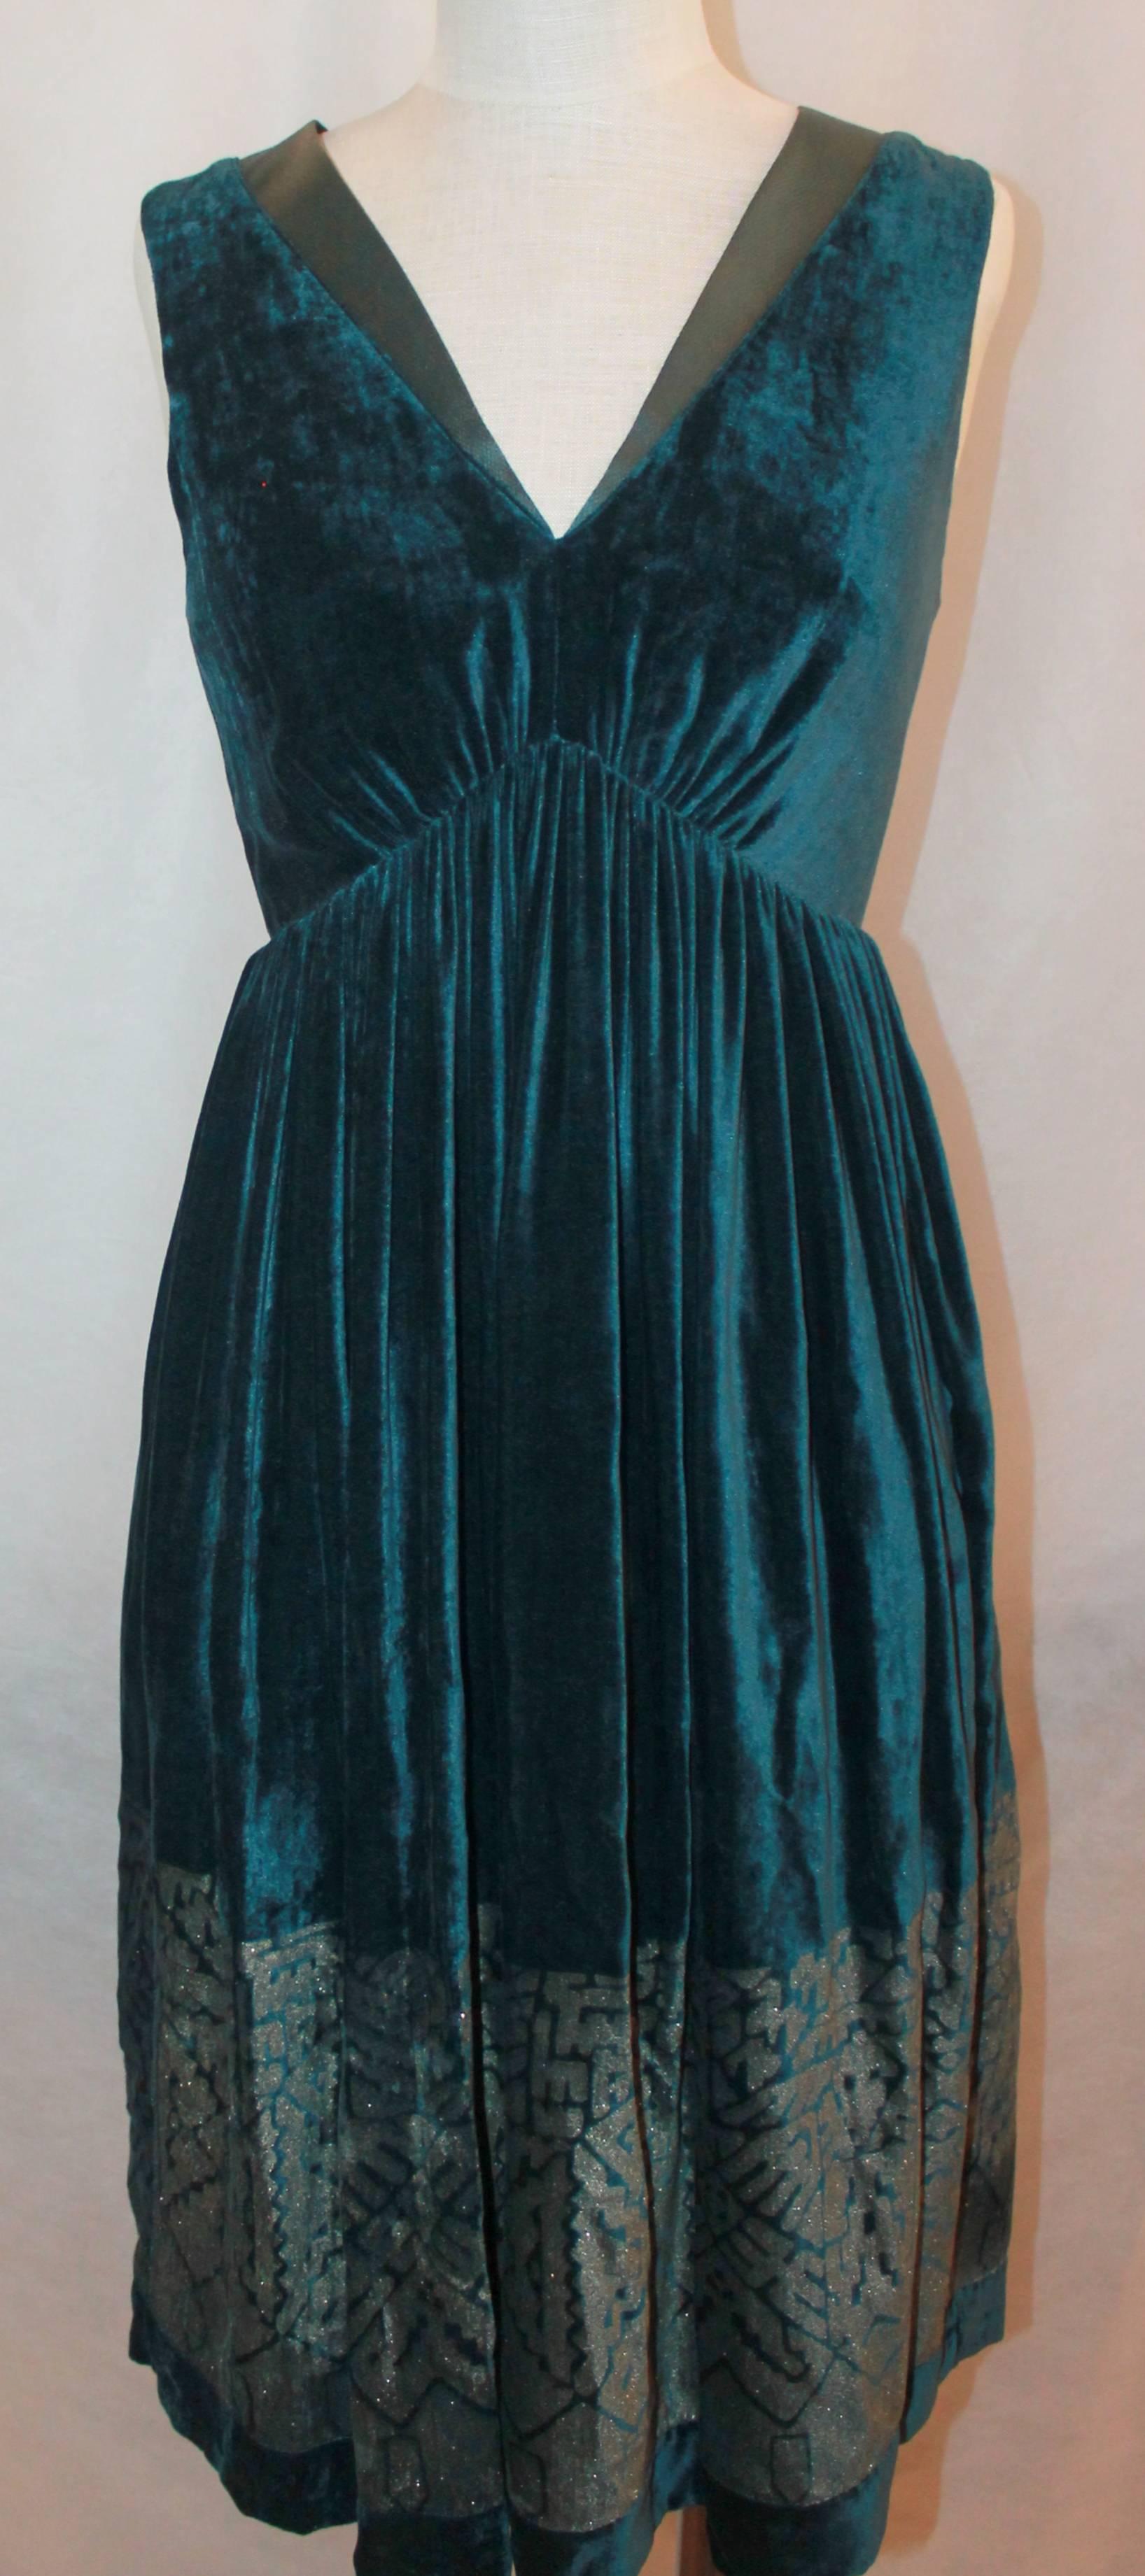 Etro Teal Velvet Dress - 40

This Etro Velvet Dress is in excellent condition with a glitter geometric print on bottom of dress and a satin neckline. There is also a matching Bolero to go with dress. Sold separately in store.